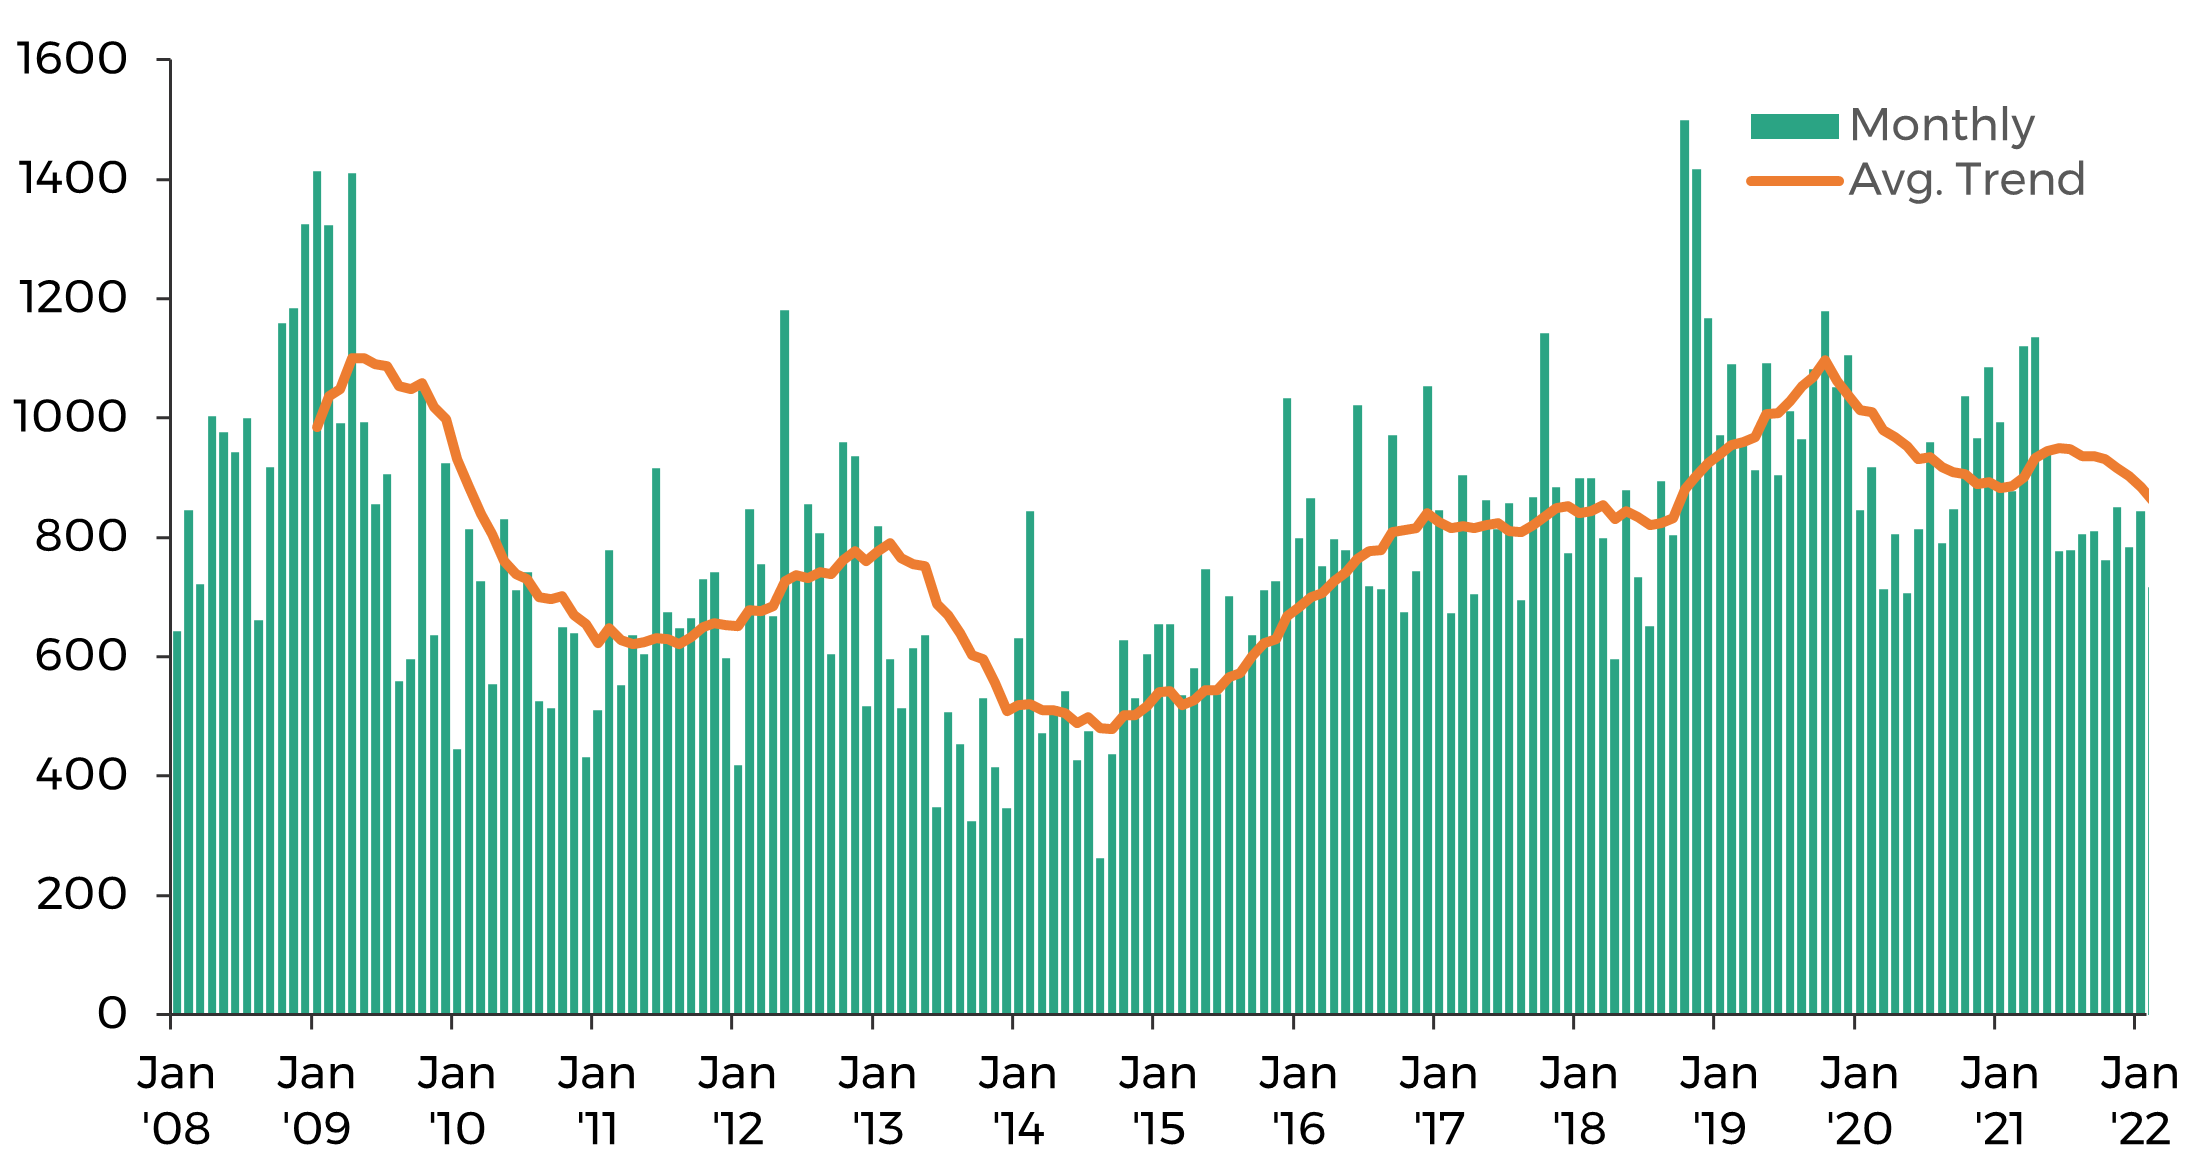 Graph 2 shows number of animals slaughtered due to bovine TB from January 2008 to January 2022. The number of animals slaughtered decreased steadily until June 2014, then increased until October 2019 to highs seen in 2008, and has since decreased.